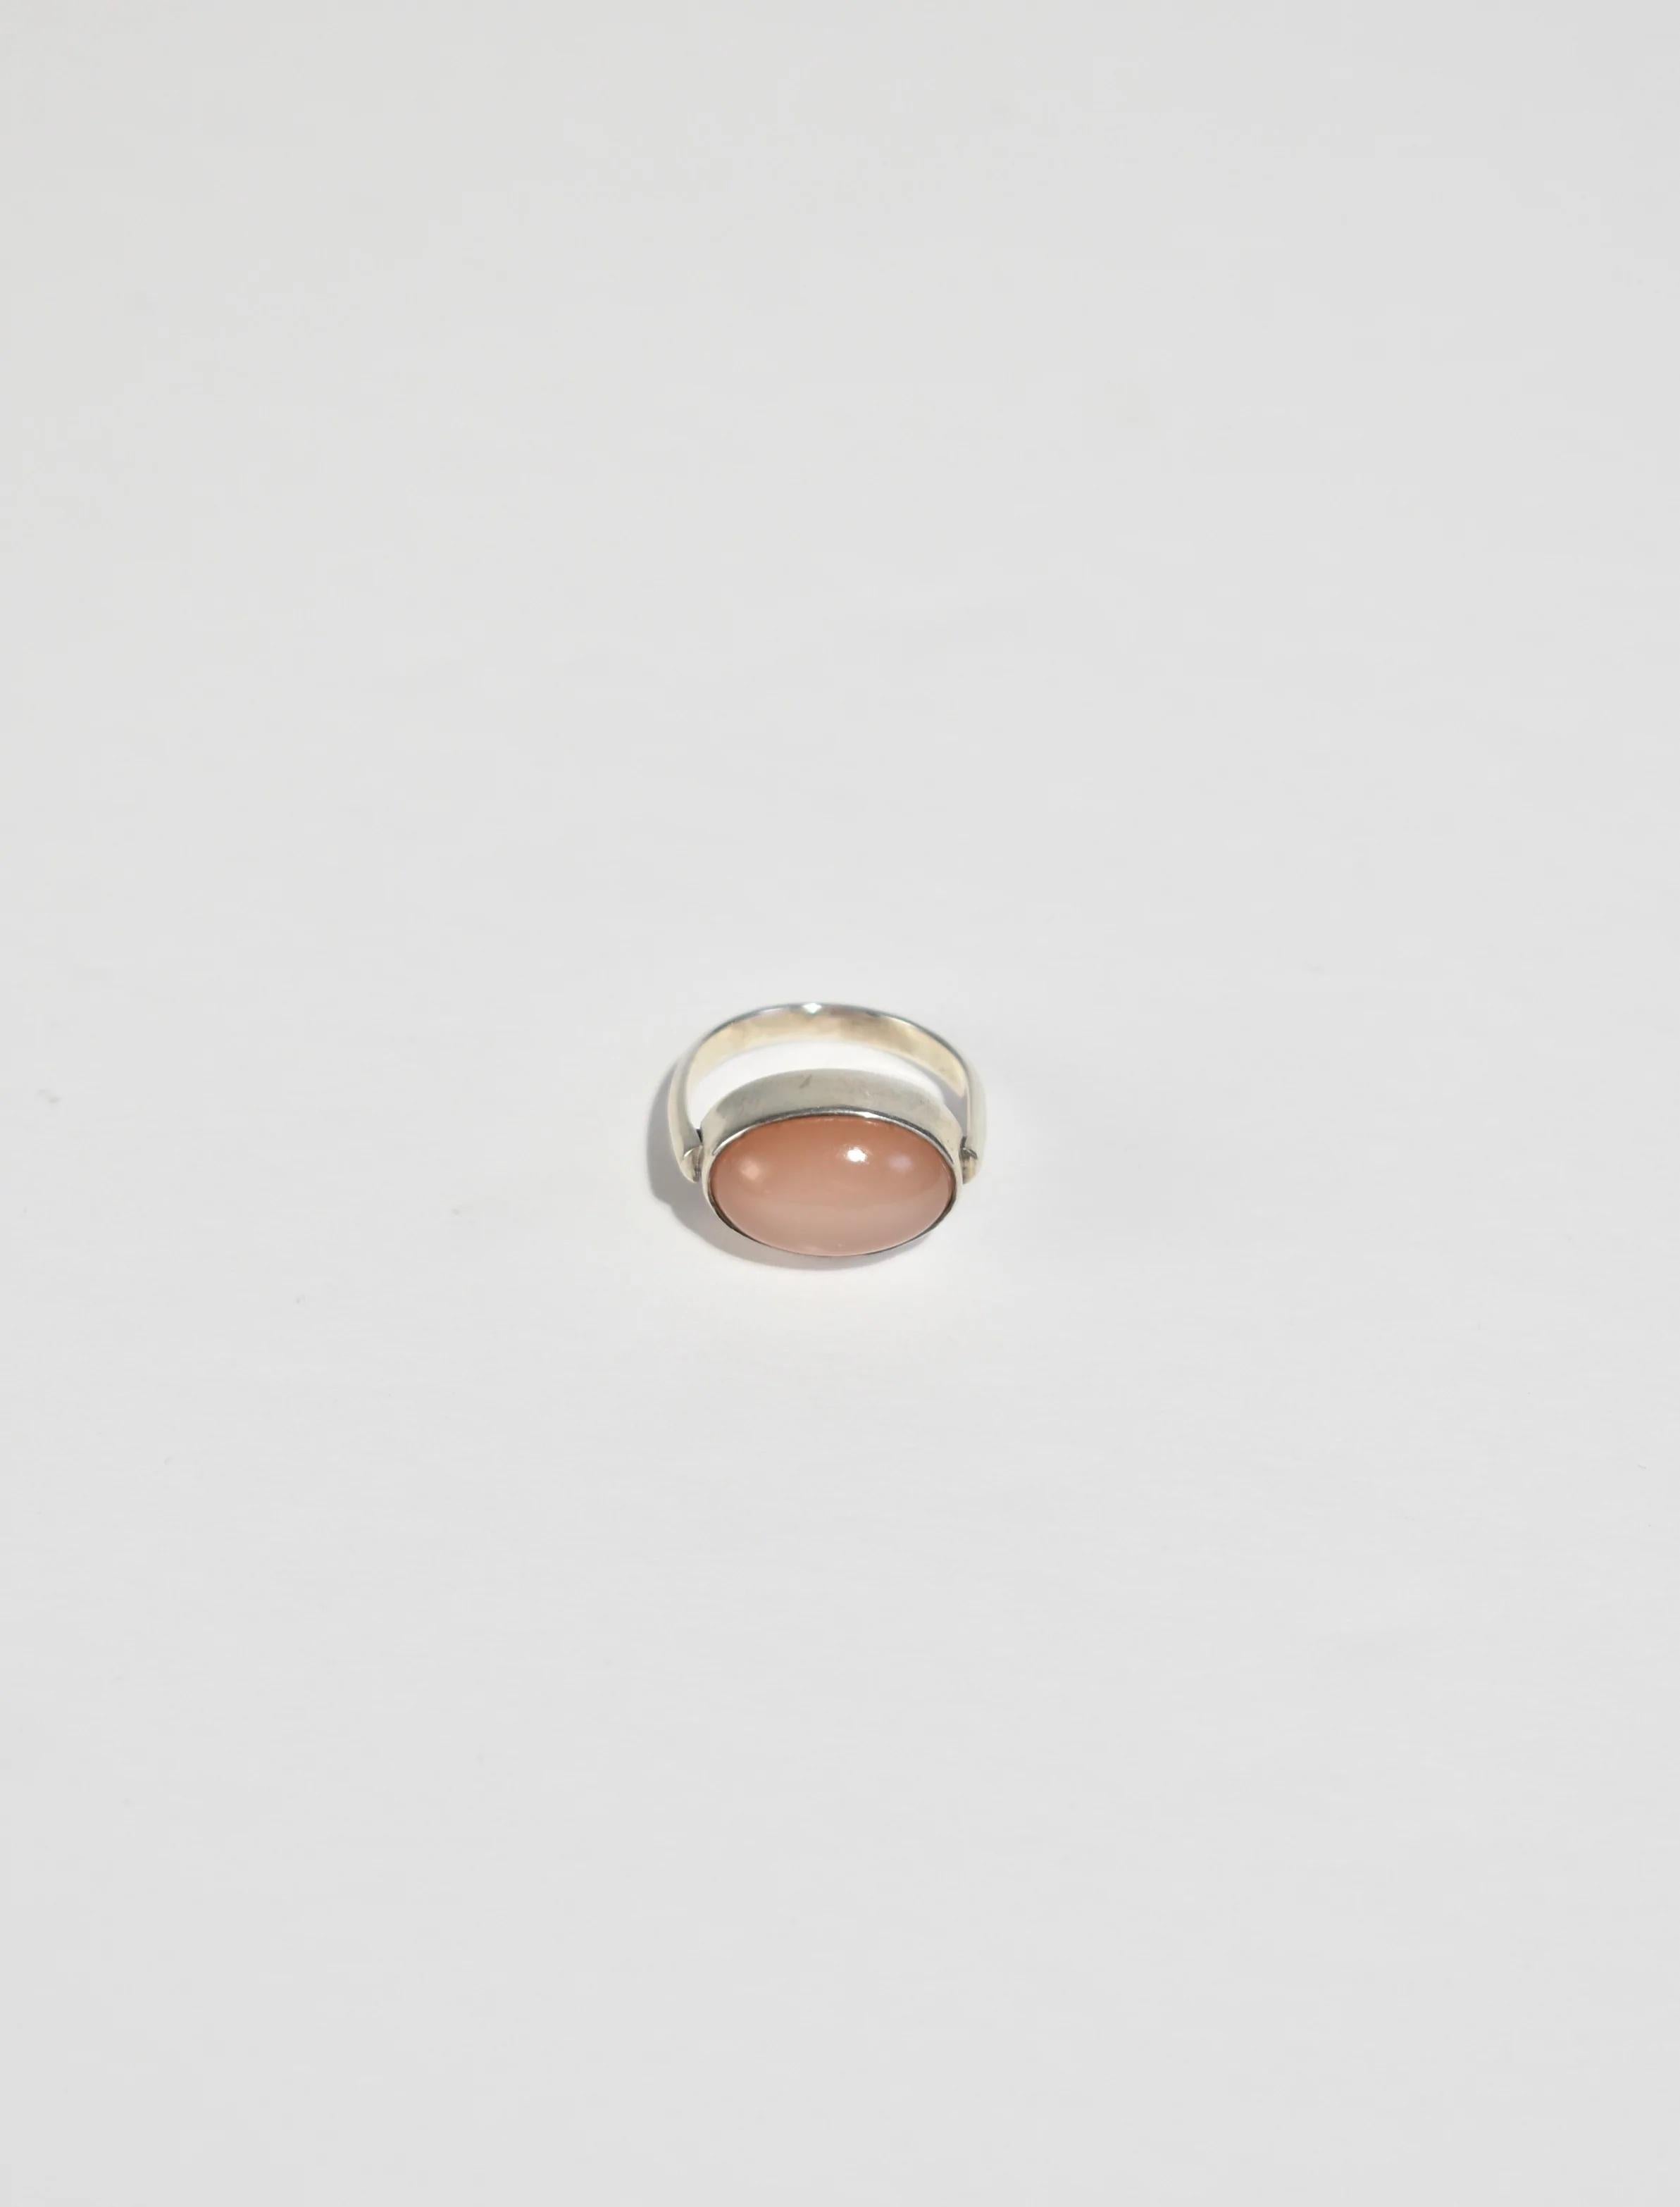 Beautiful vintage sterling ring with an oval pink moonstone cabochon.

Material: Sterling silver, moonstone.